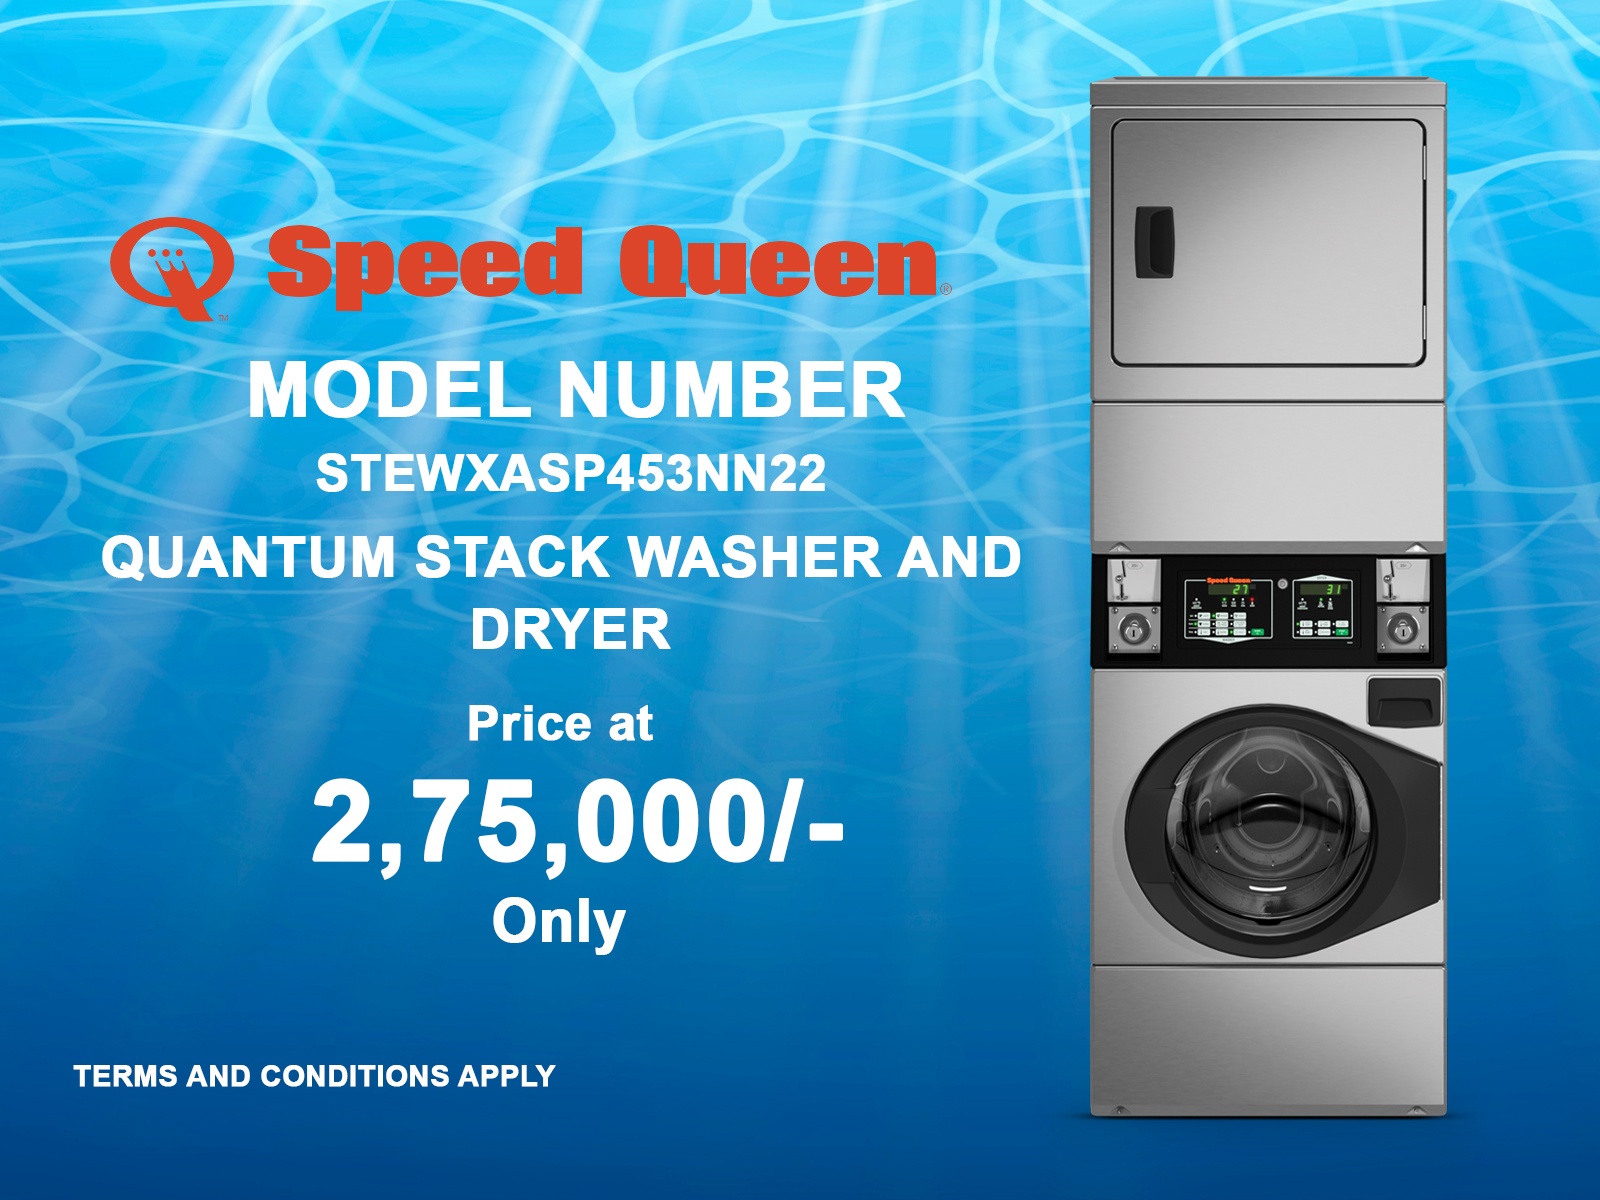 Quantum Stack Washer and Dryer